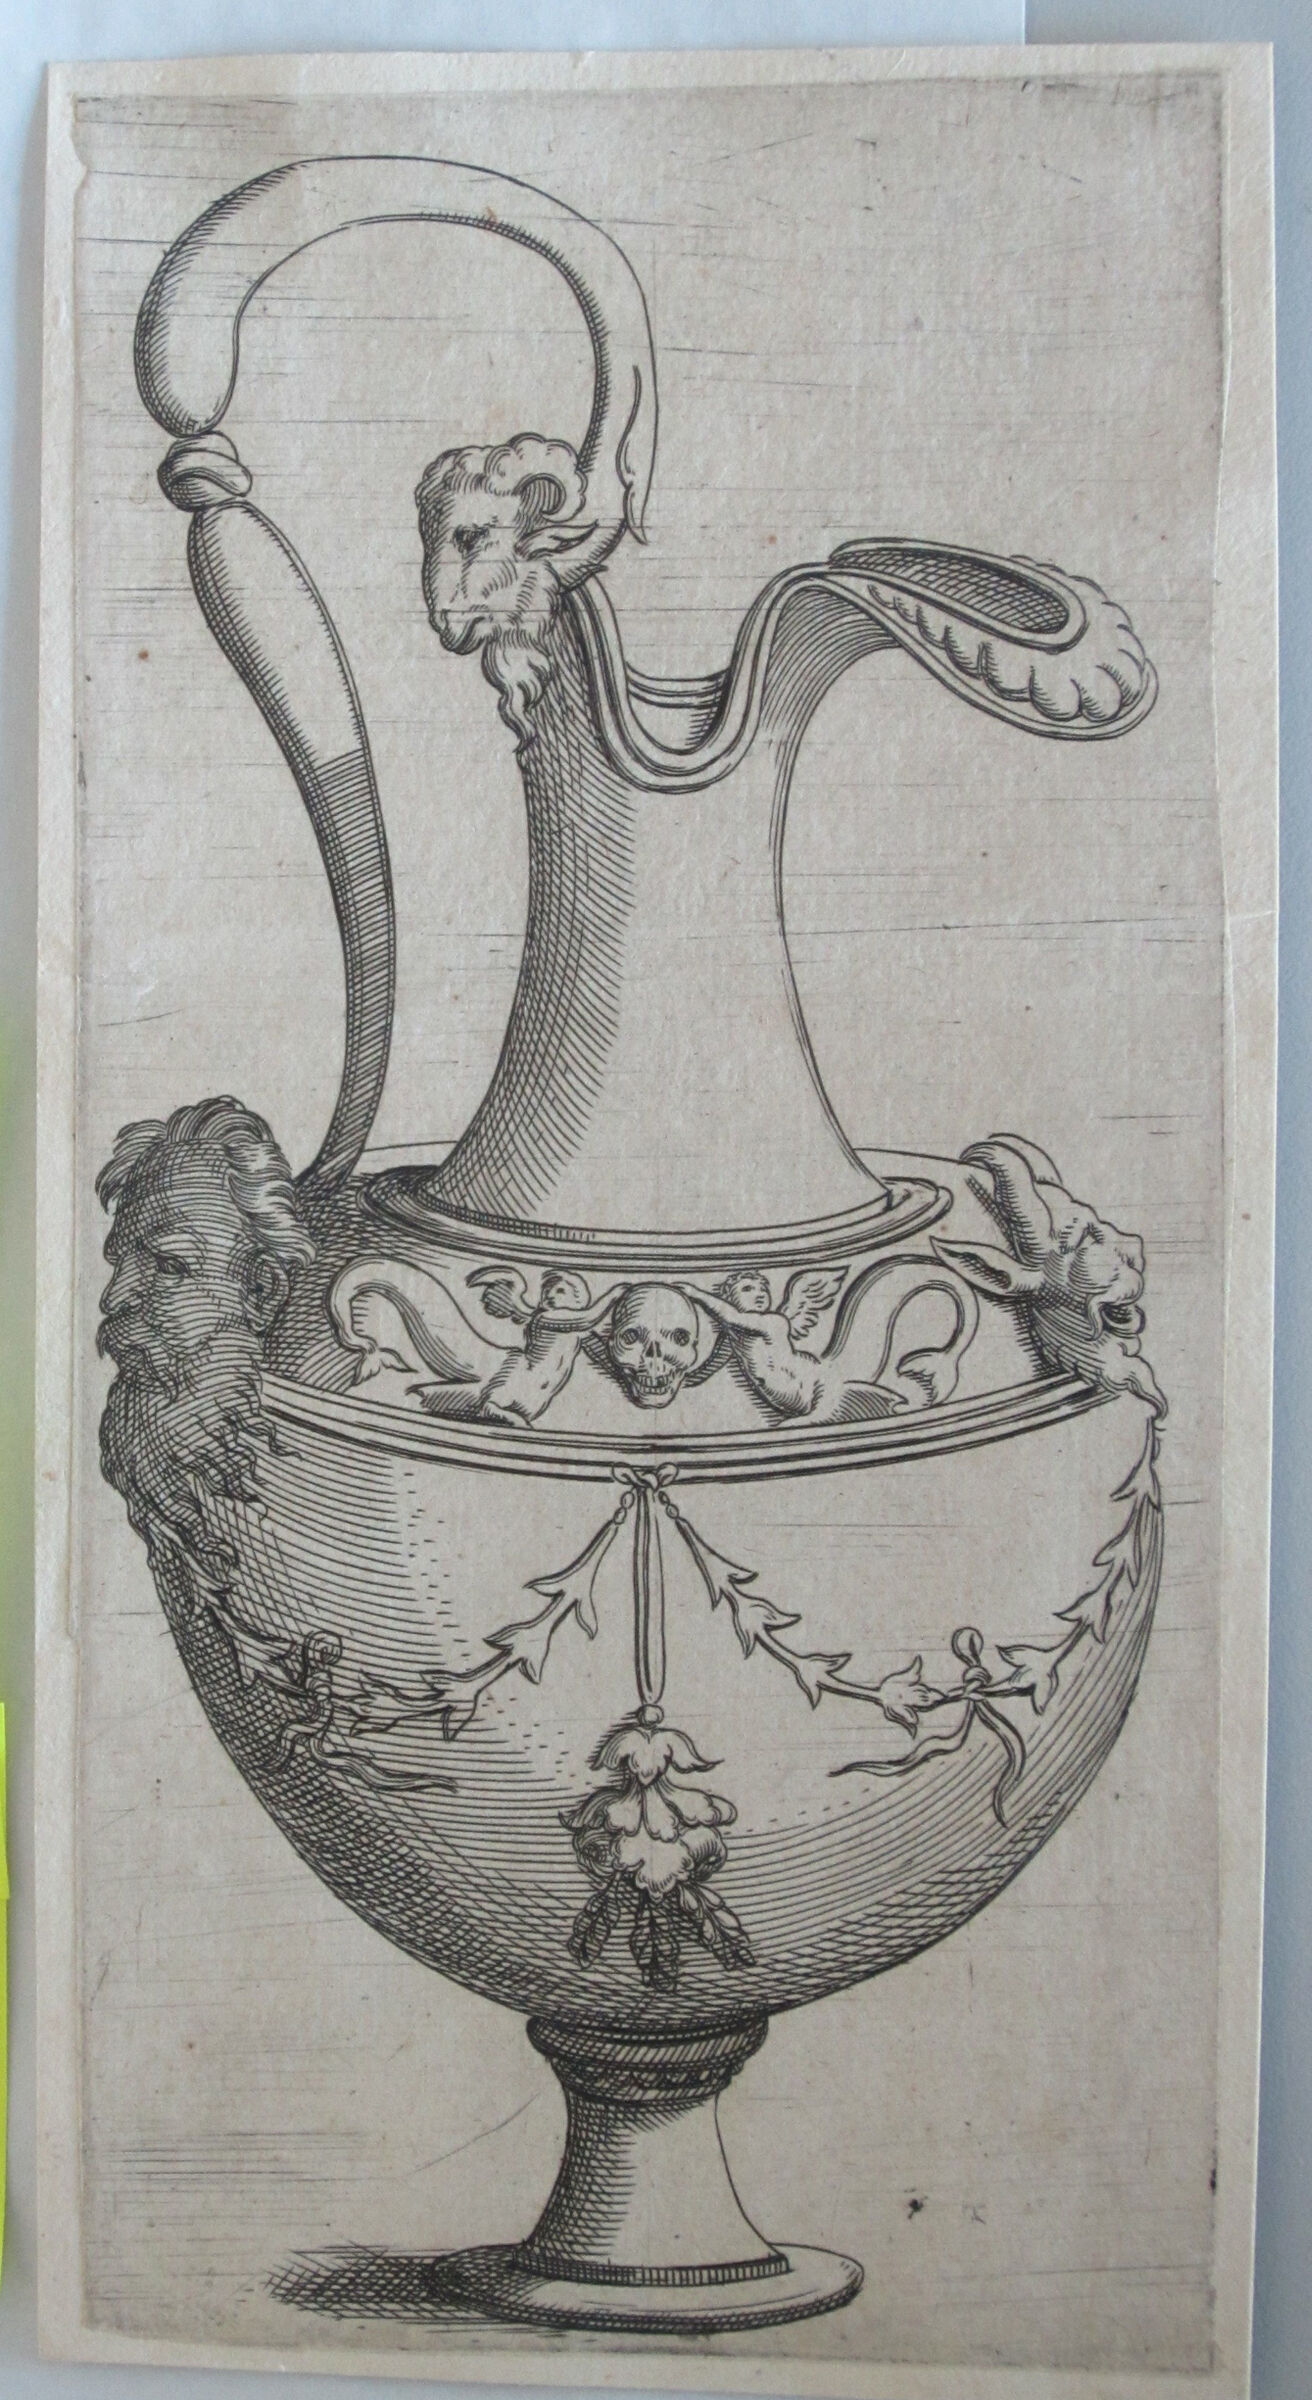 Ewer With Winged Putti With Fish Tails Holding A Skull, A Ram's Head On The Handle